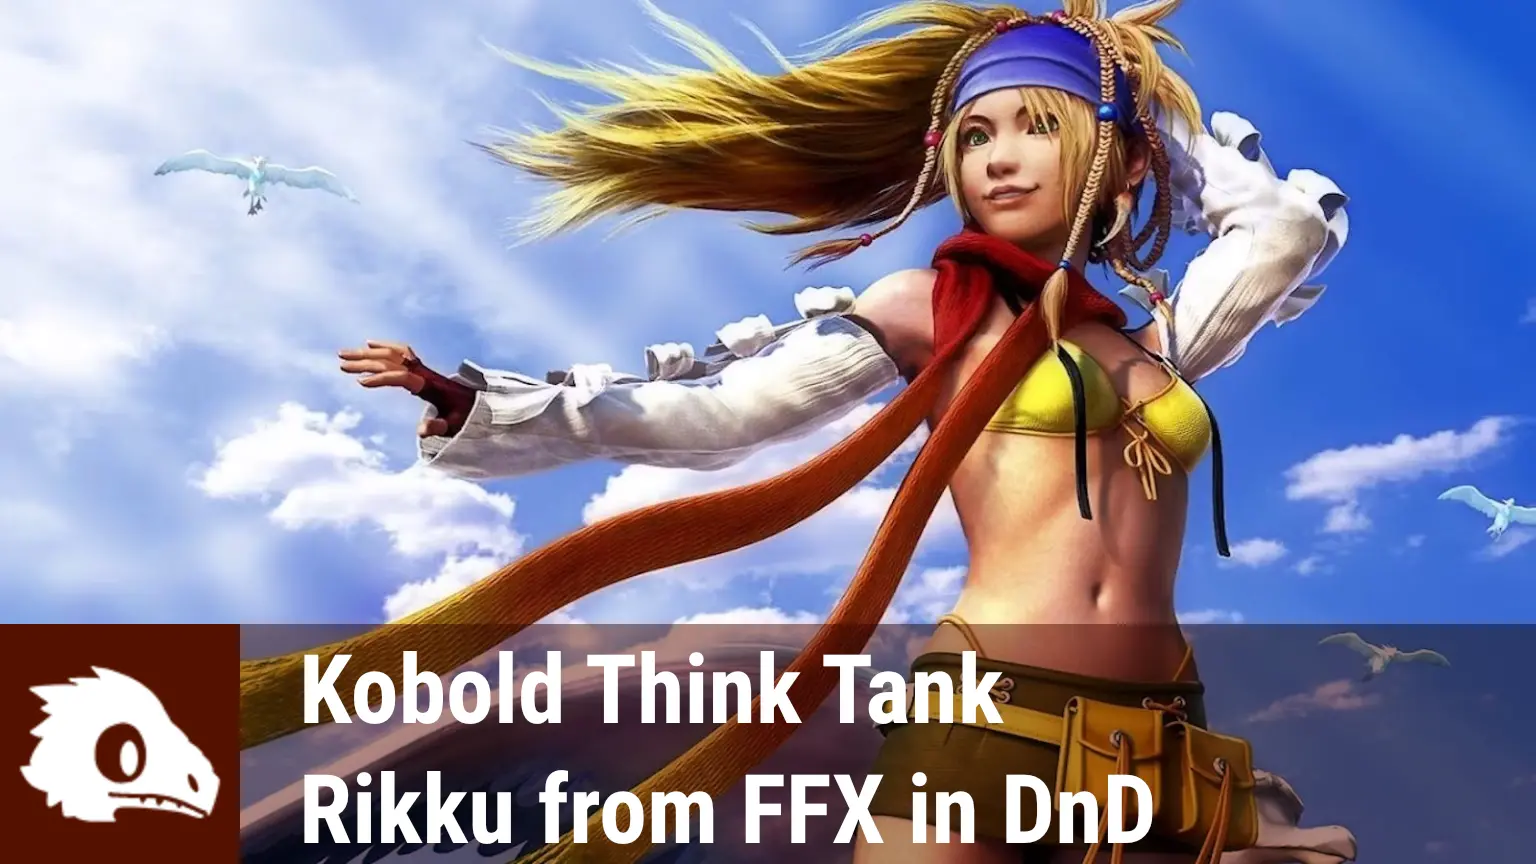 Graphic of Rikku from Final Fantasy X